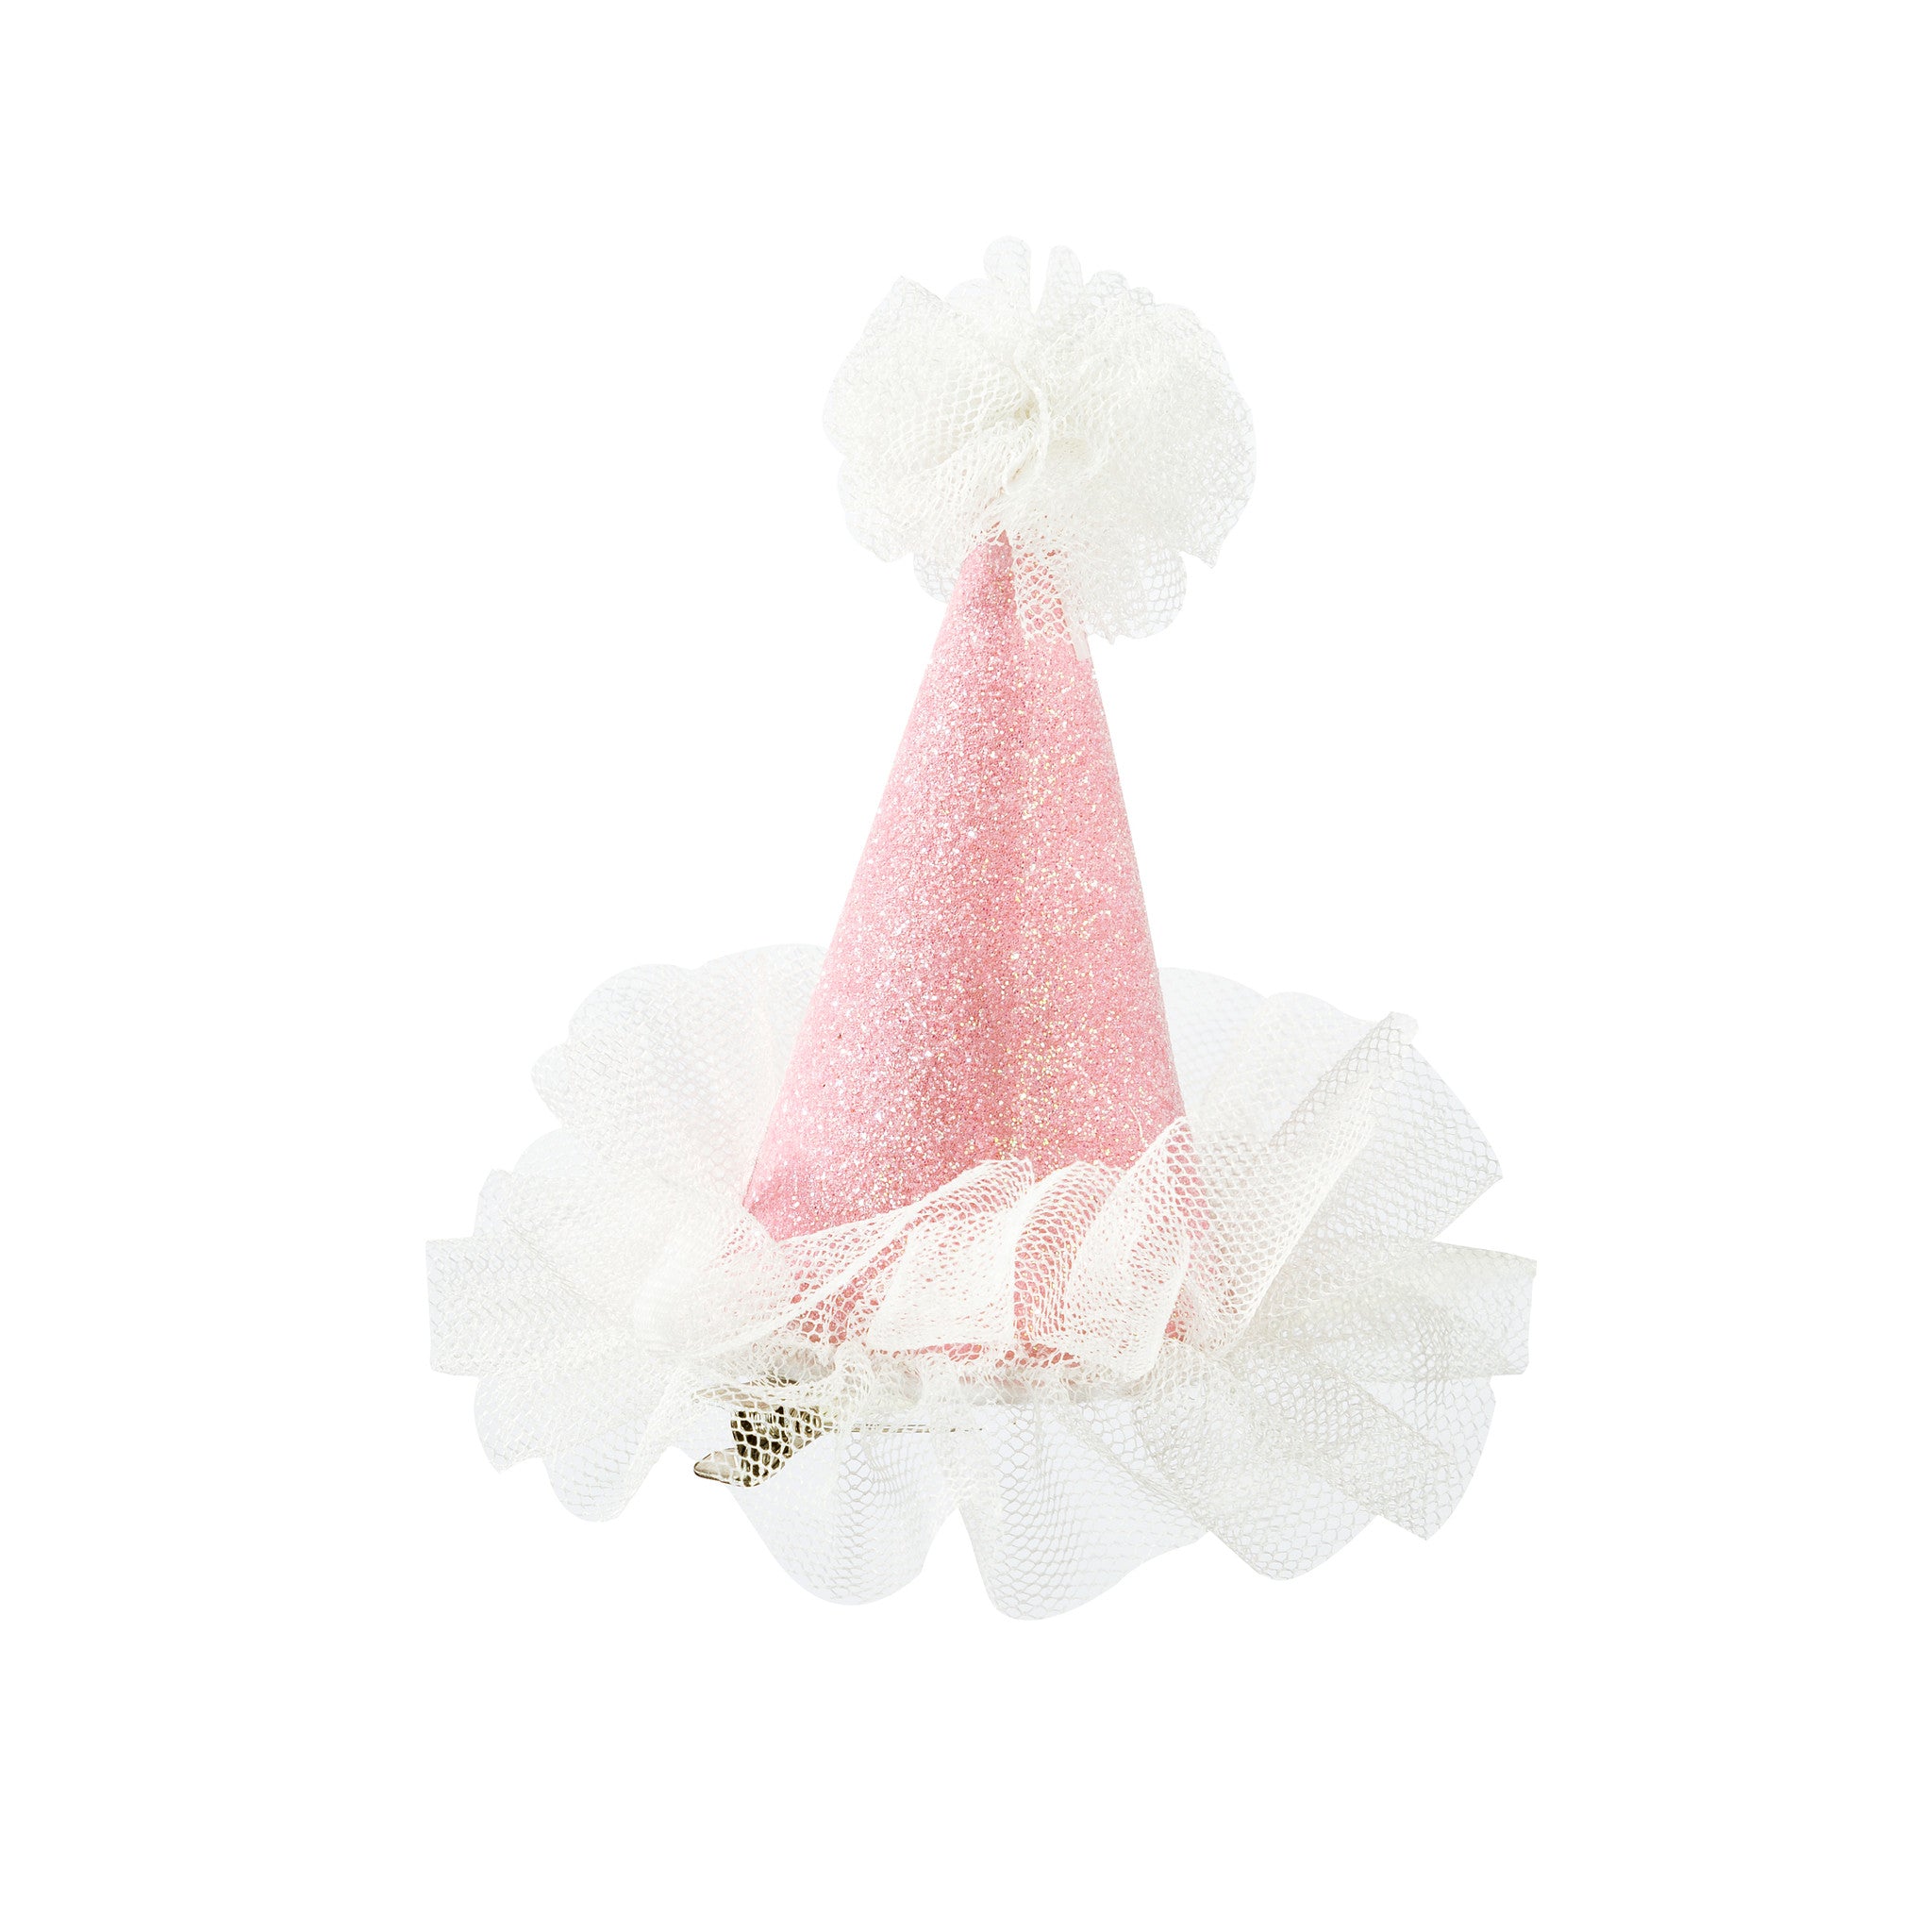 Pink Mini Party Hat